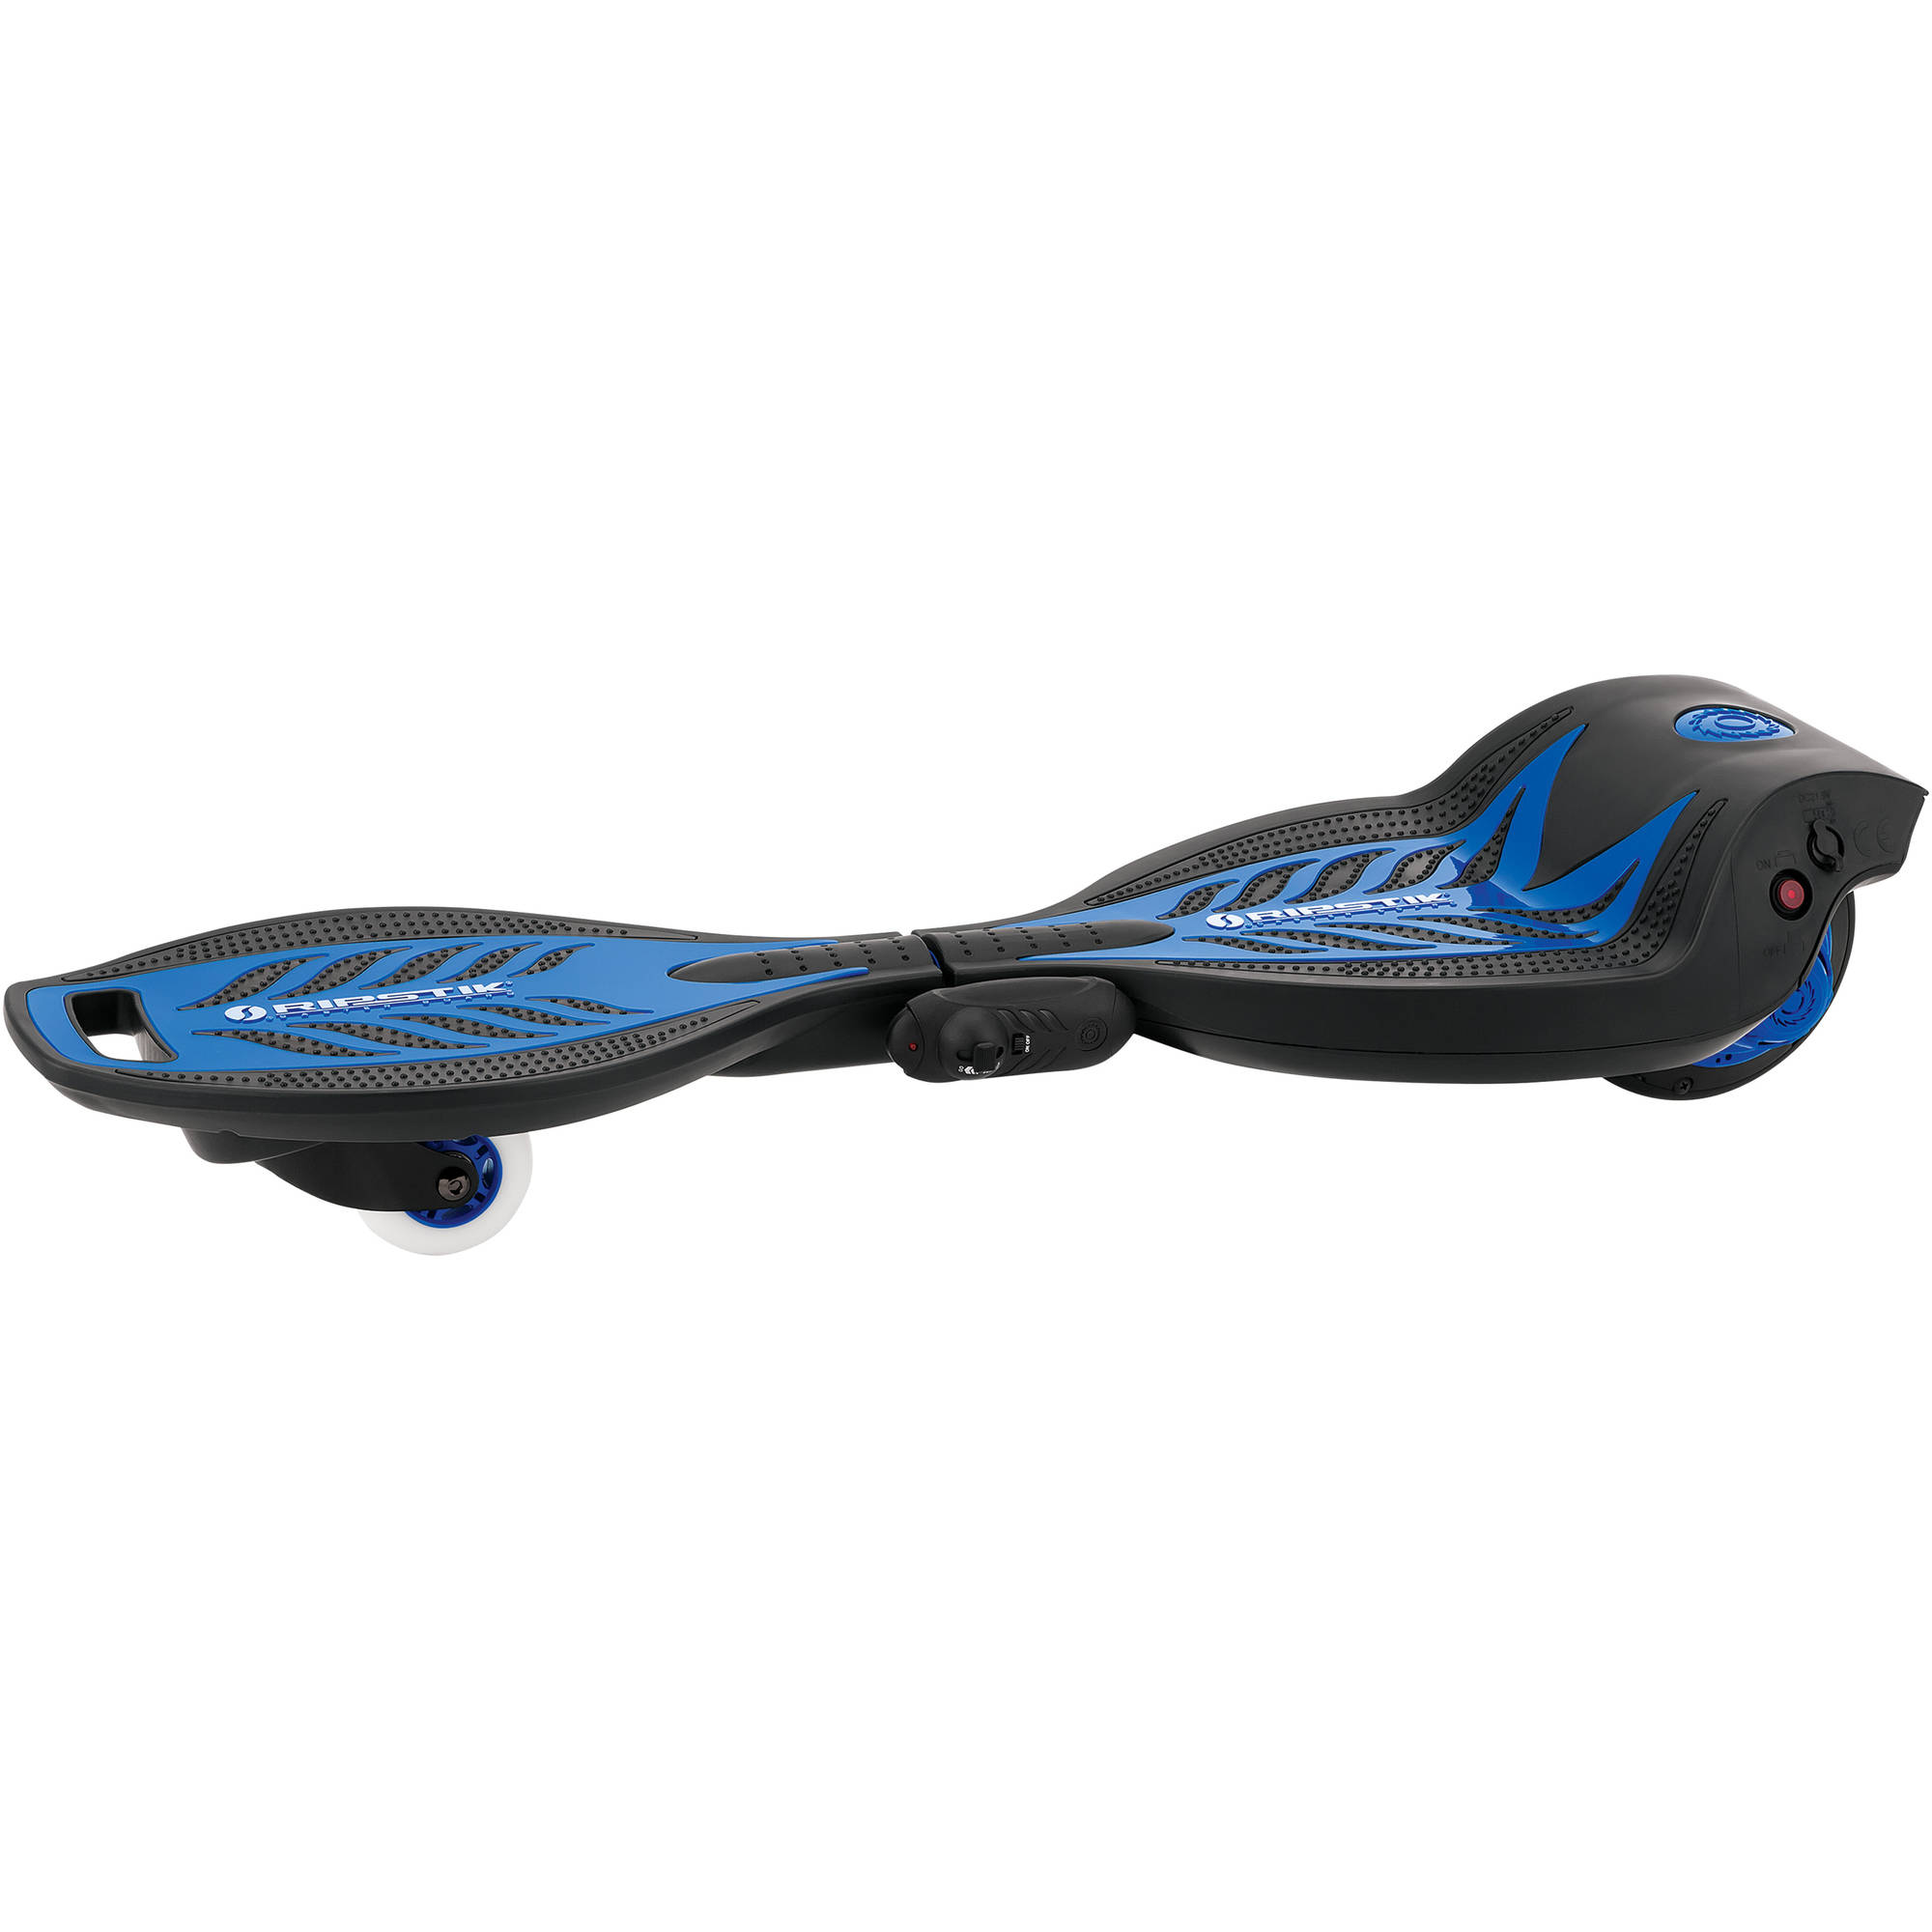 Razor RipStik Electric Caster Board with Power Core Technology and Wireless Remote, Blue - image 1 of 13